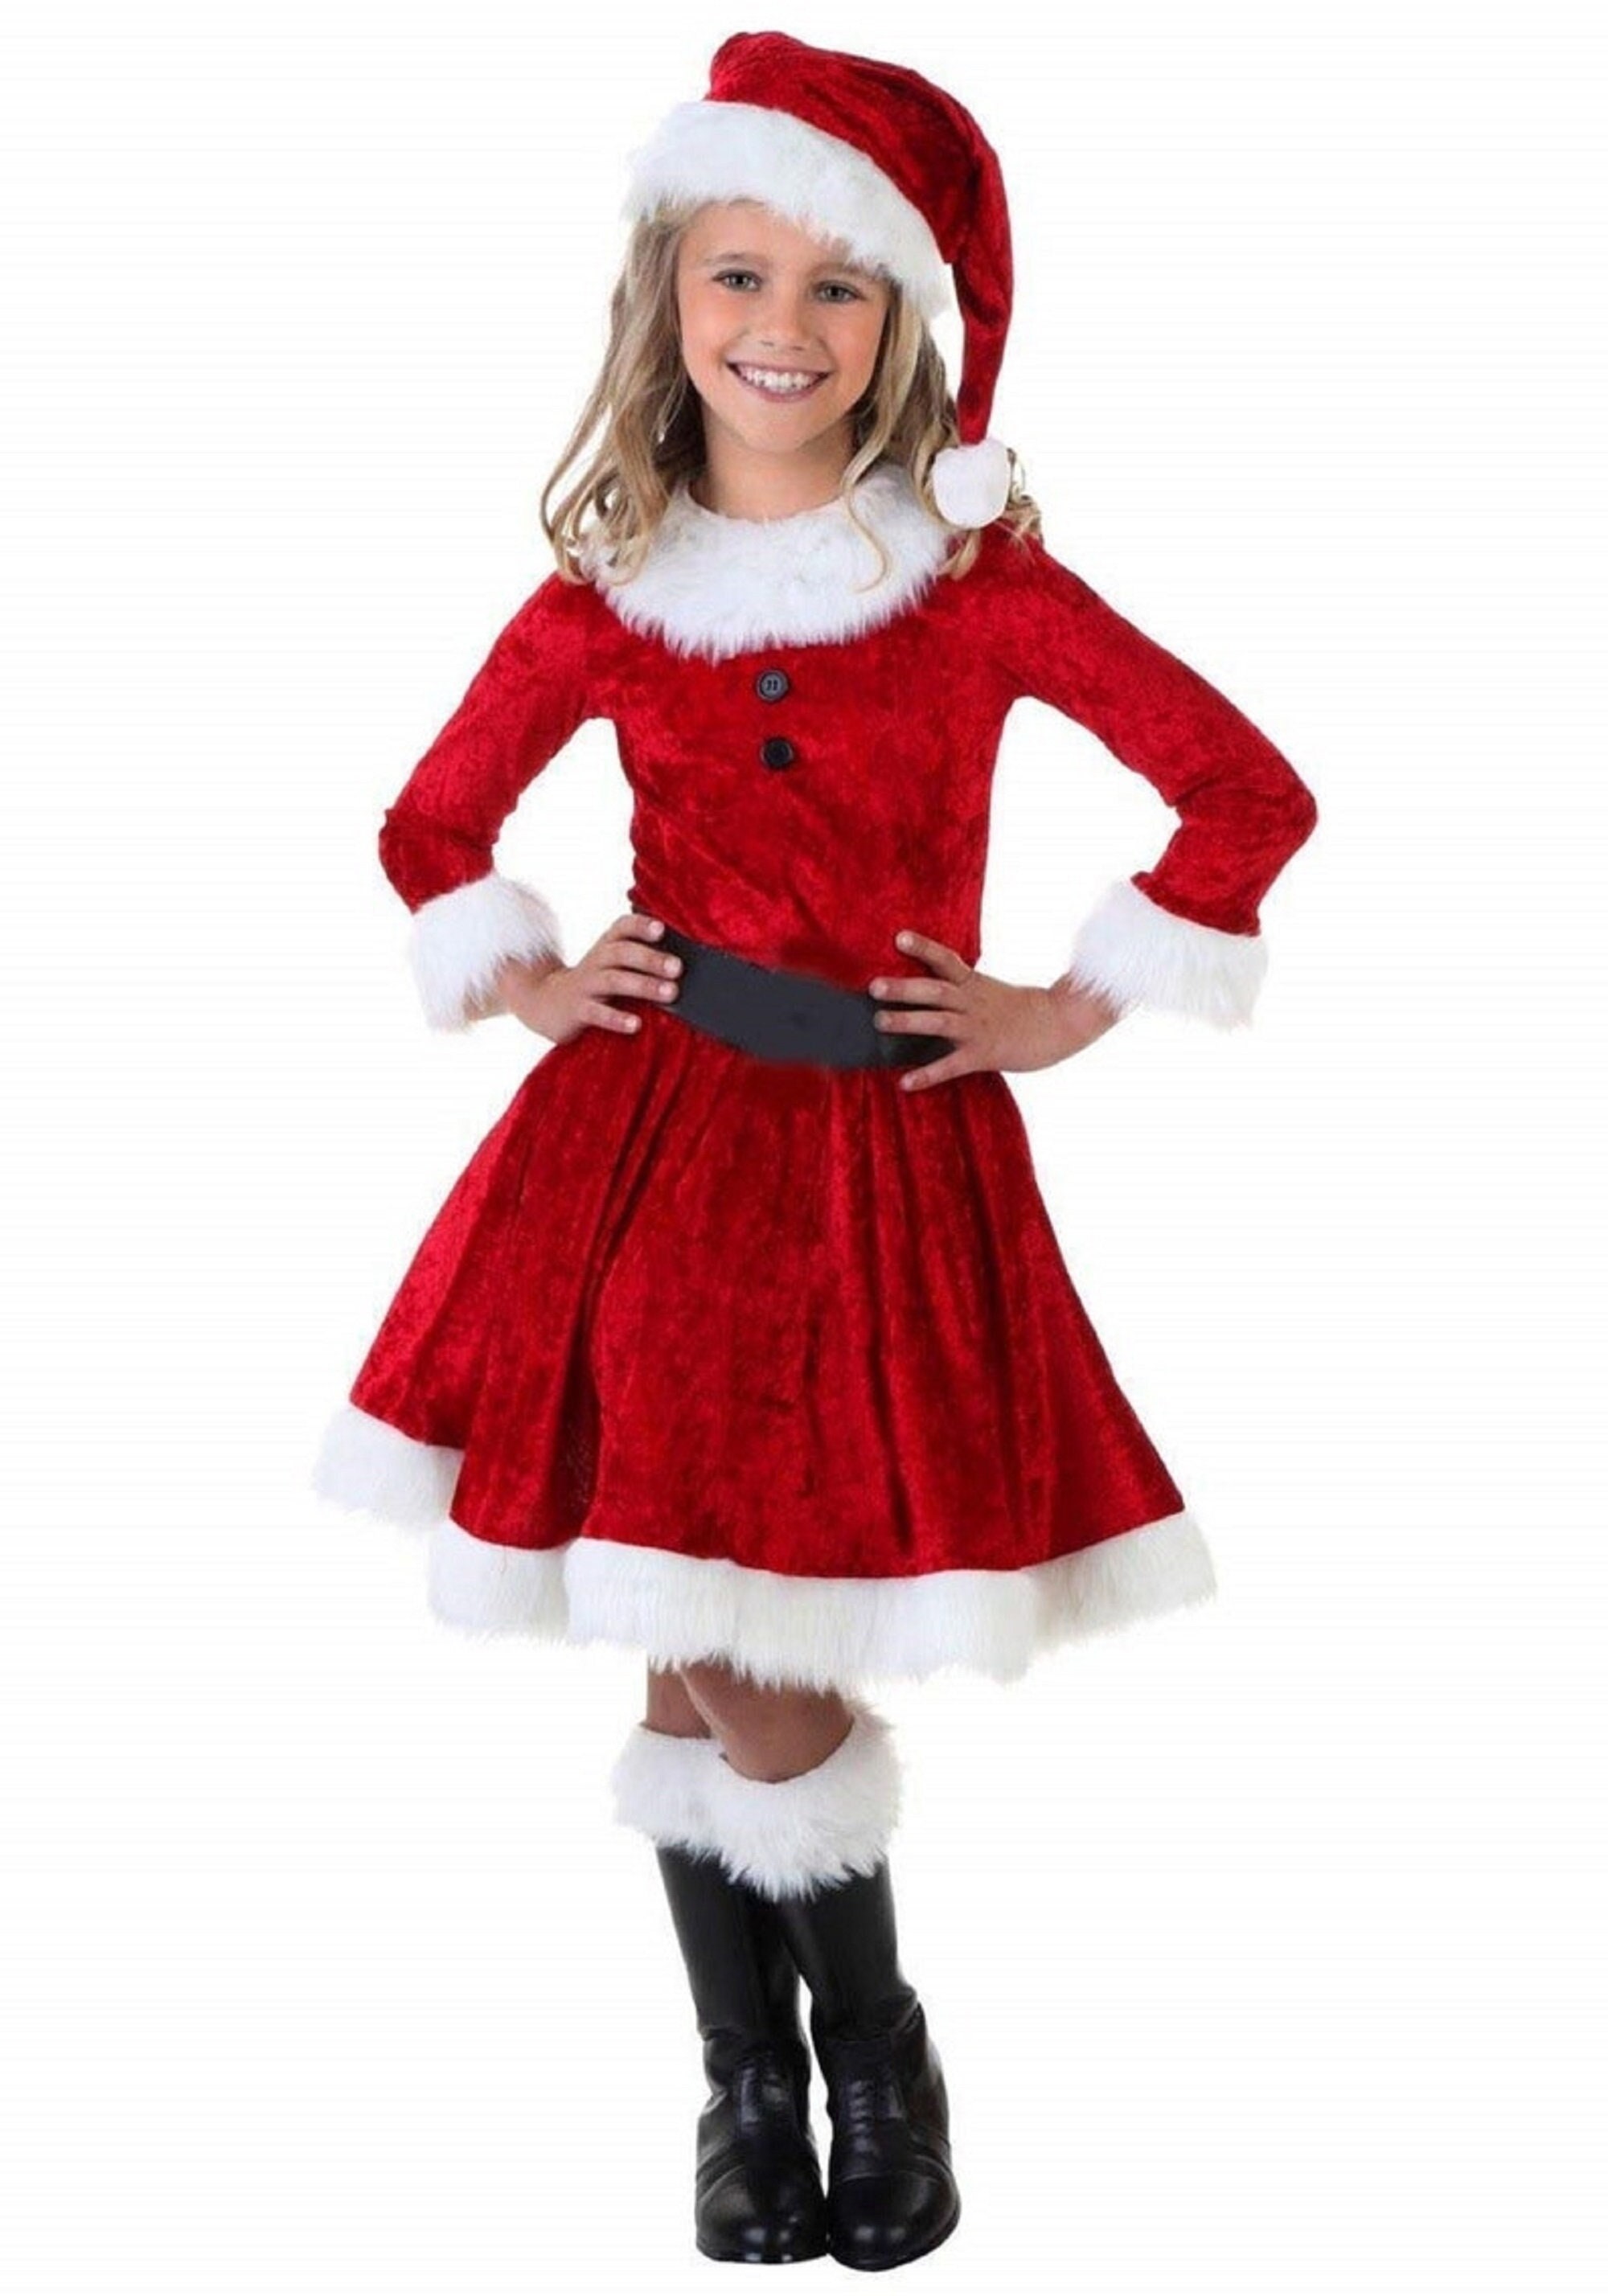 Cichic Girls Christmas Dress Festival Outfit Girl Sleeveless Party Santa Dresses 2-9 Years 